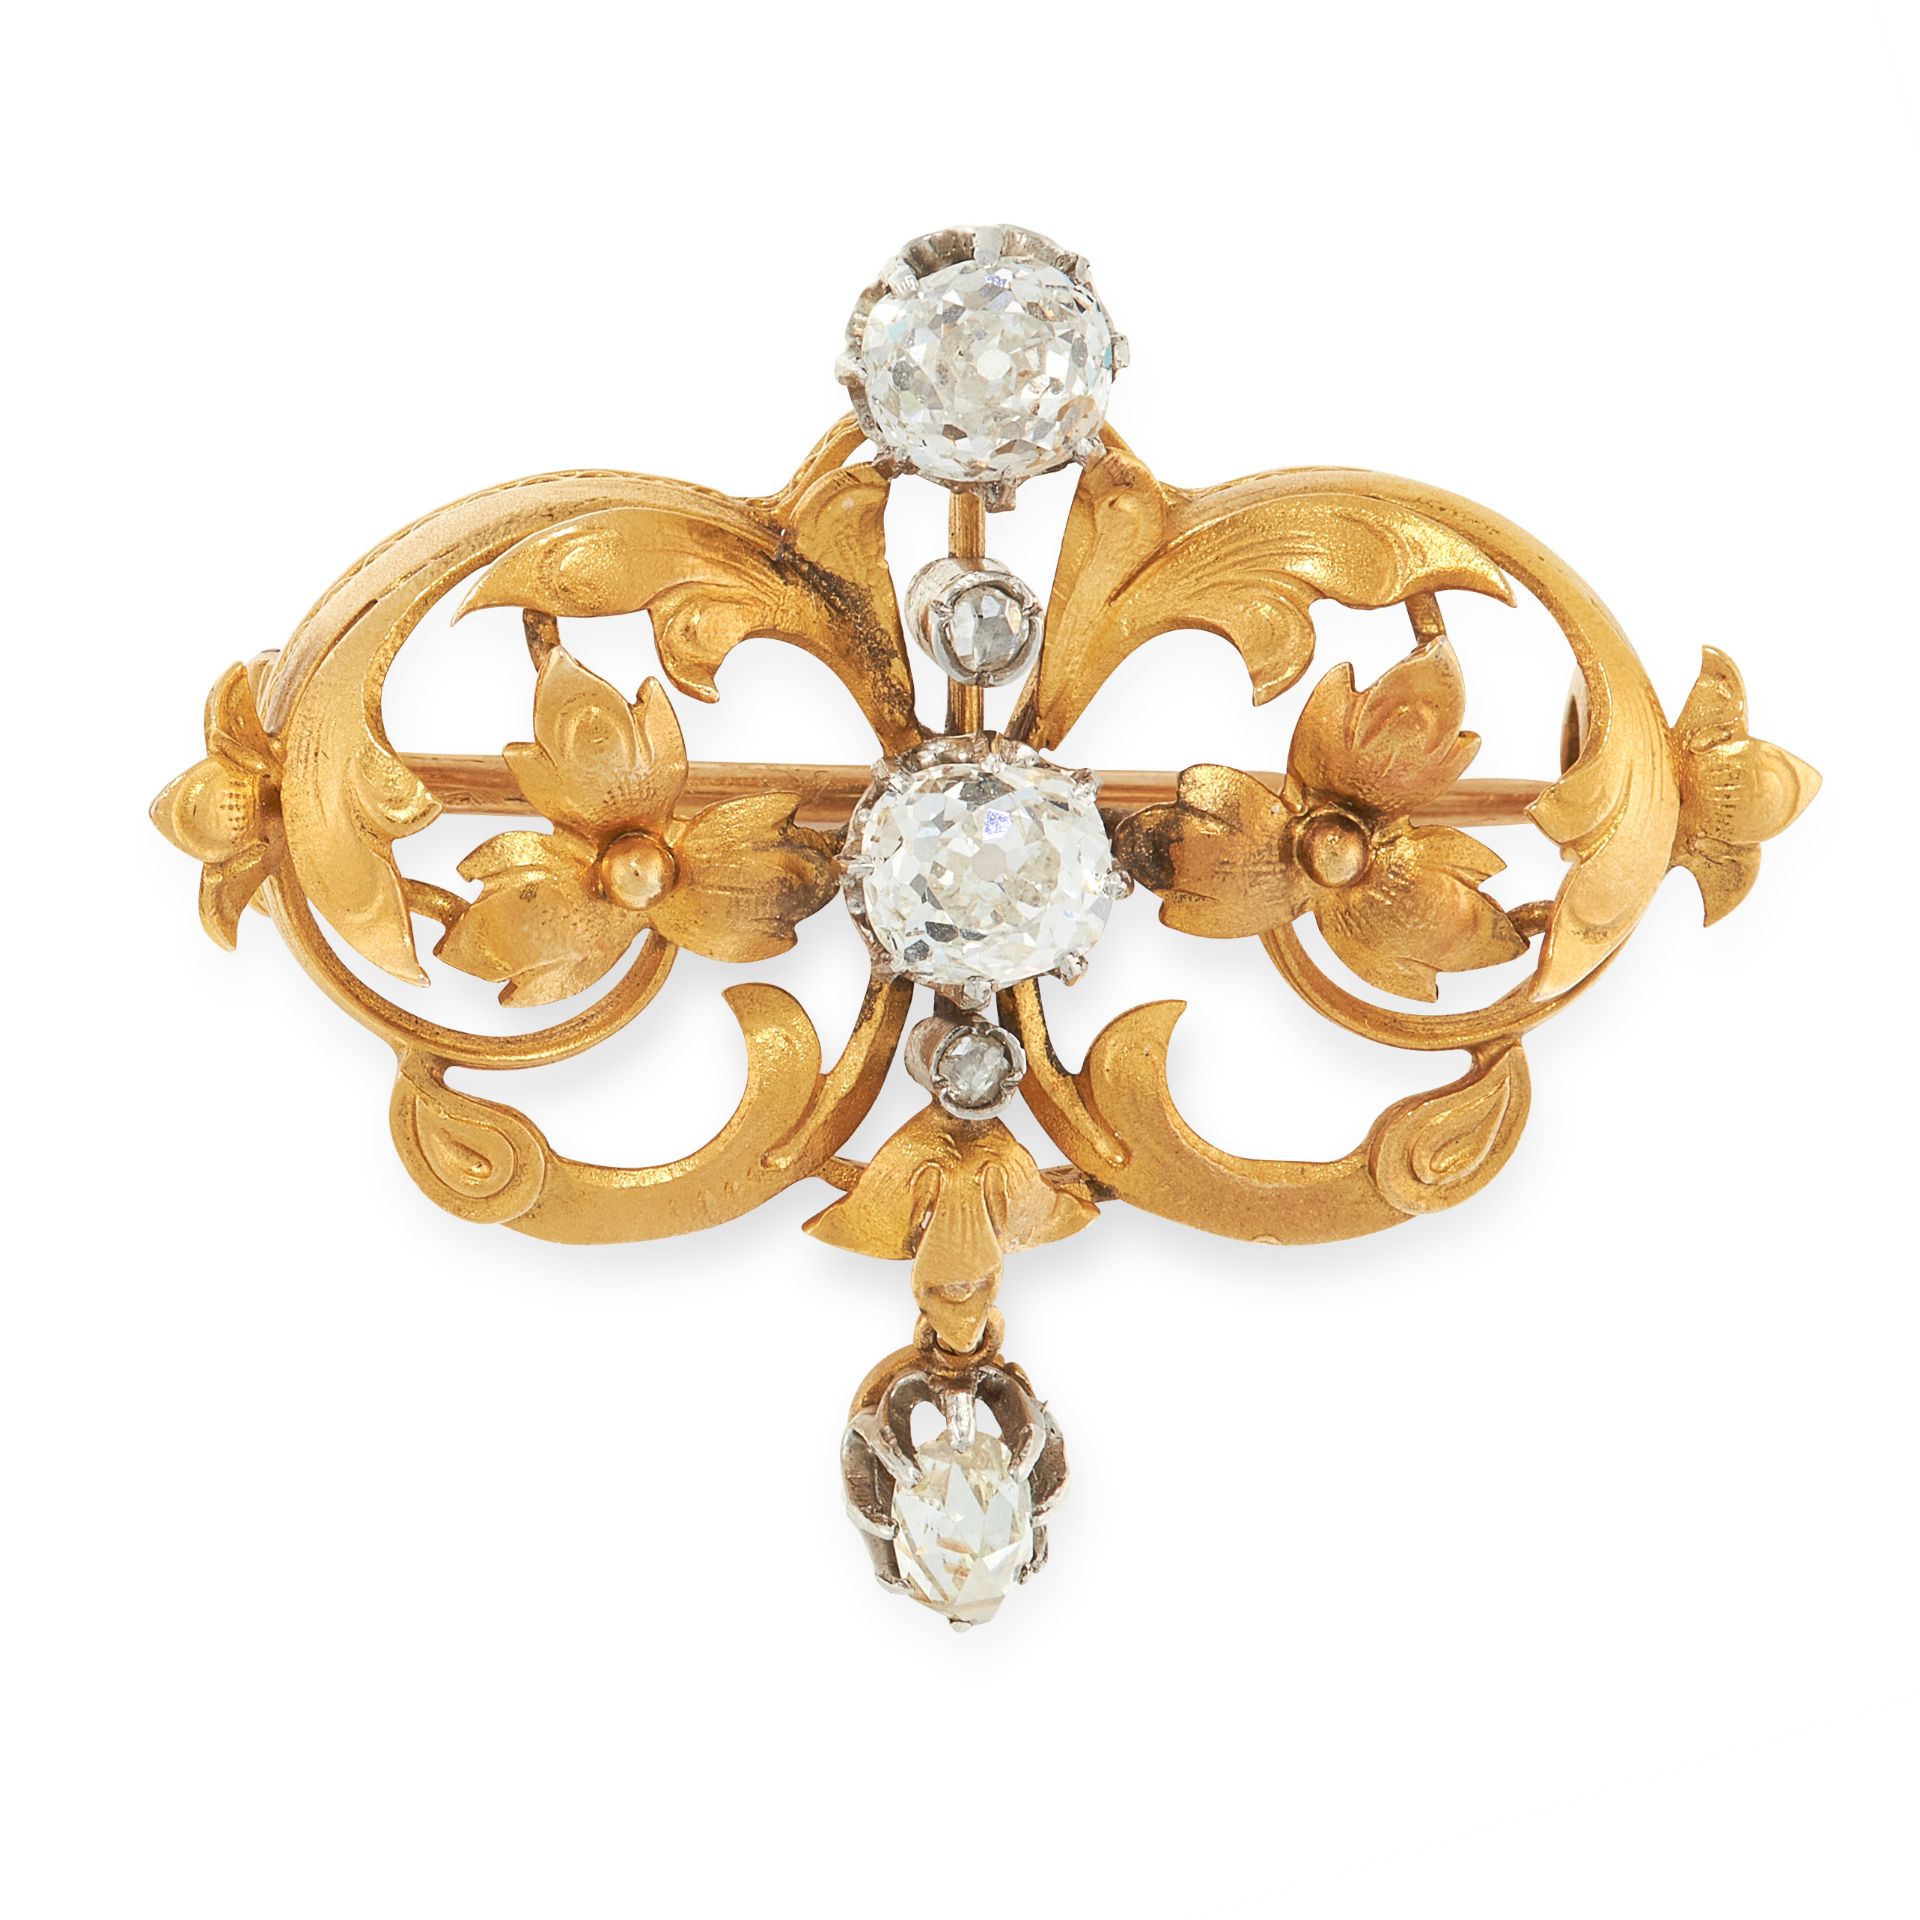 AN ANTIQUE DIAMOND BROOCH, CIRCA 1900 in 18ct yellow gold, set with two principal old cut diamonds